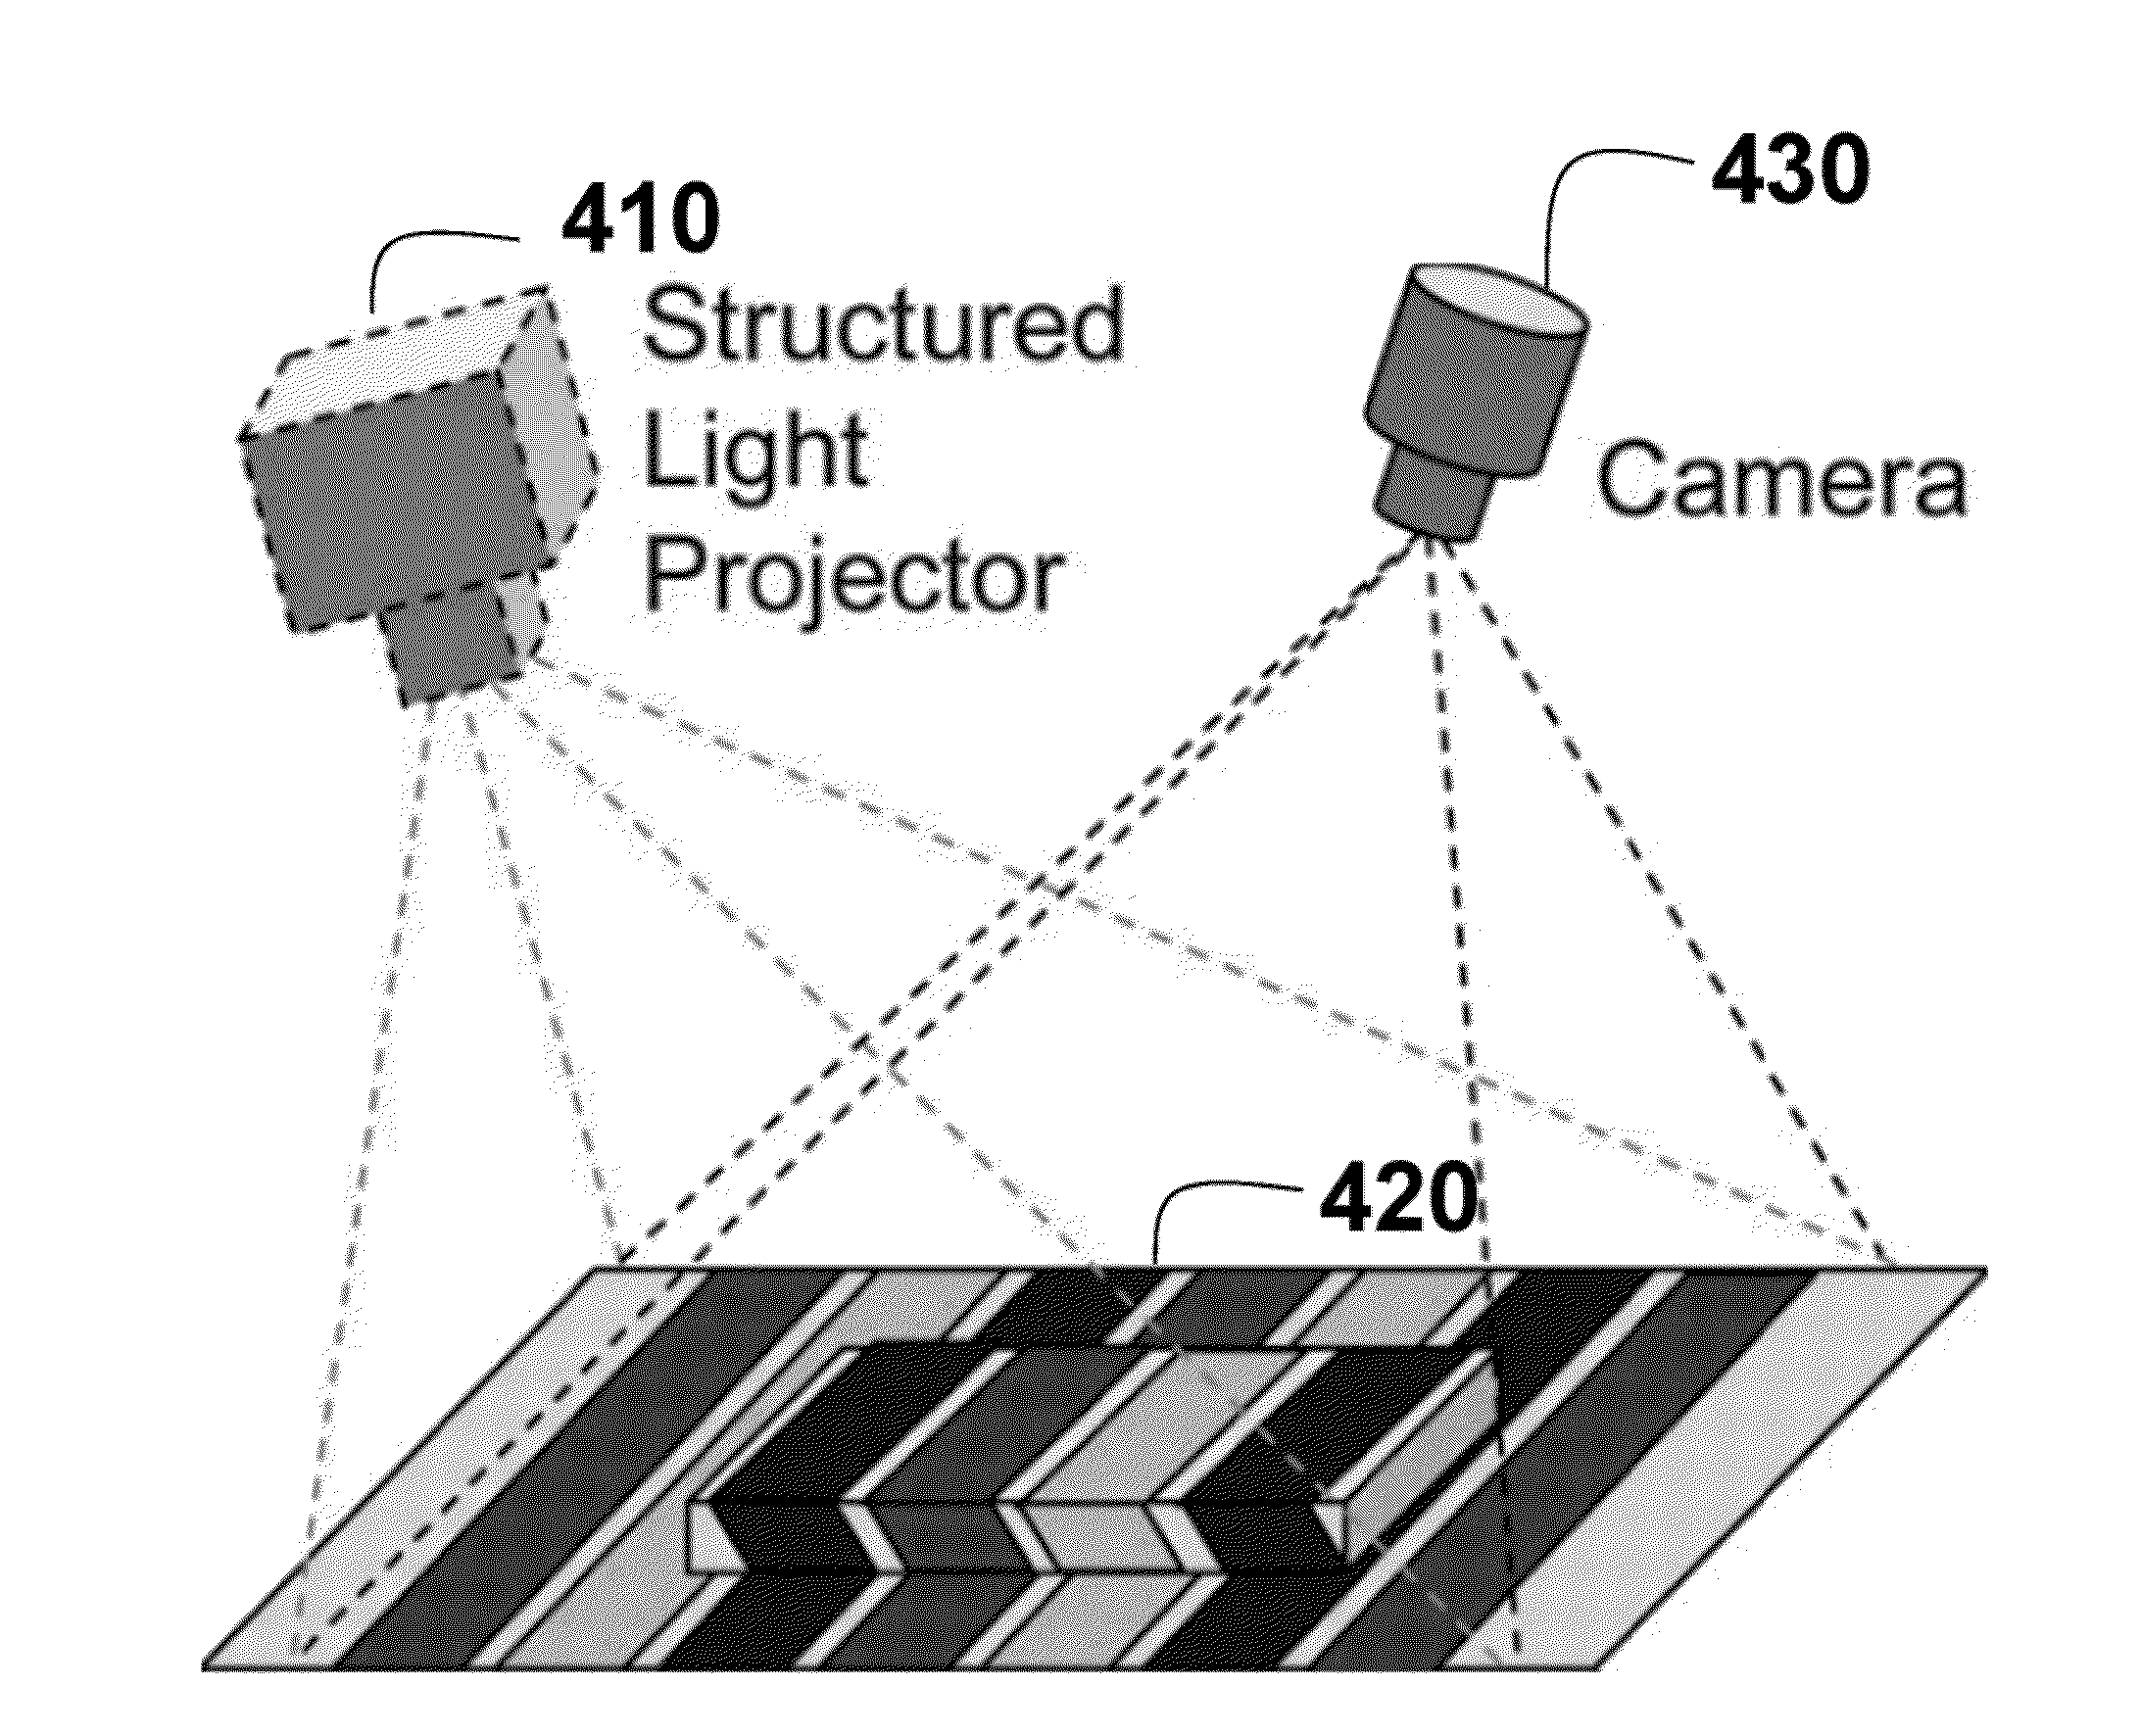 Method and System for Generating Structured Light with Spatio-Temporal Patterns for 3D Scene Reconstruction